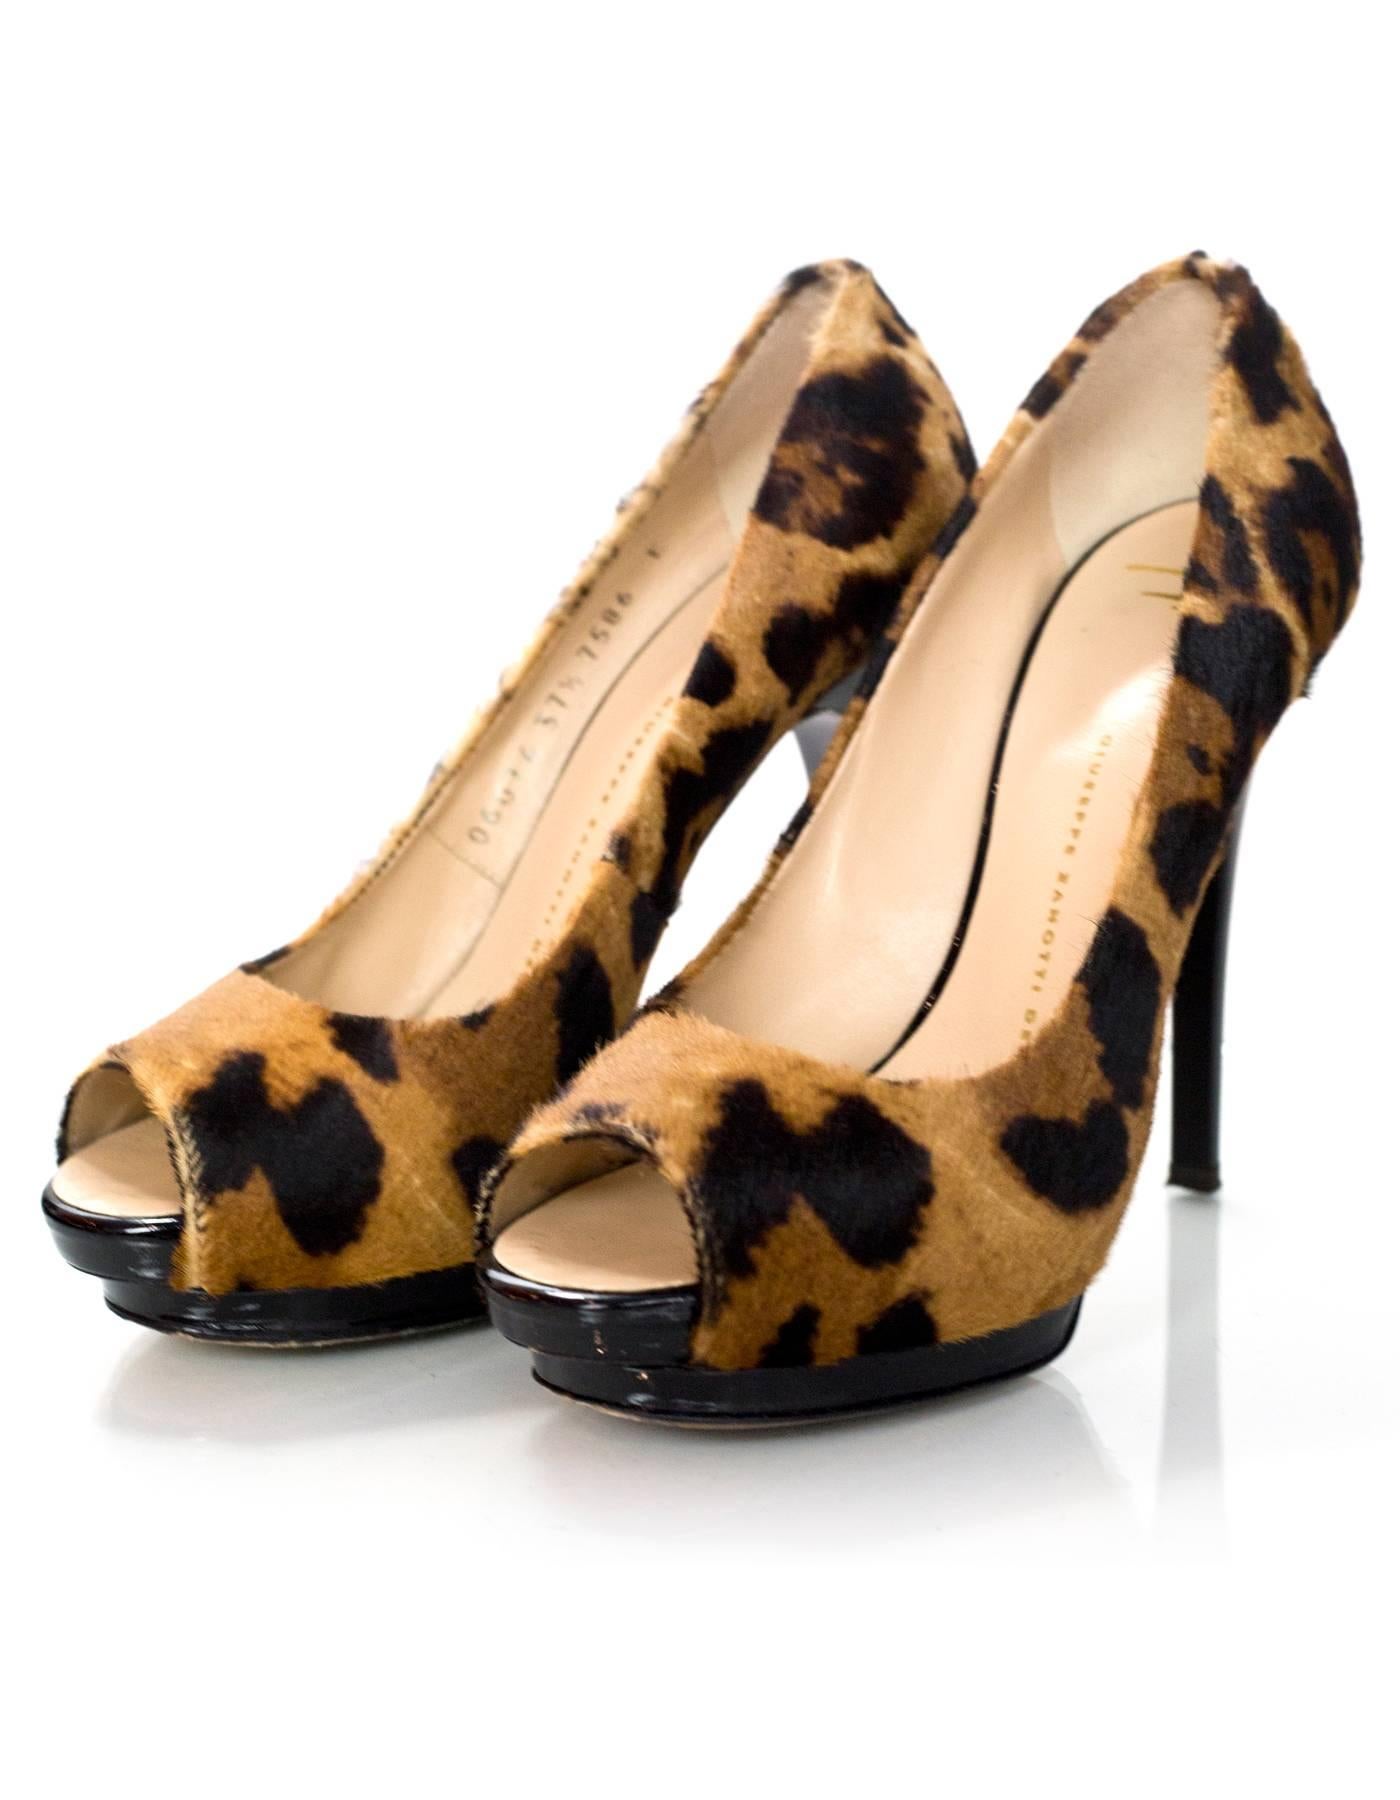 Giuseppe Zanotti Leopard Print Ponyhair Open-toe Pumps Sz 37.5

Made In: Italy
Color: Tan, brown
Materials: Ponyhair
Closure/Opening: Slide on
Sole Stamp: Vero Cuoio Made in Italy 37.5
Overall Condition: Very good pre-owned condition with the